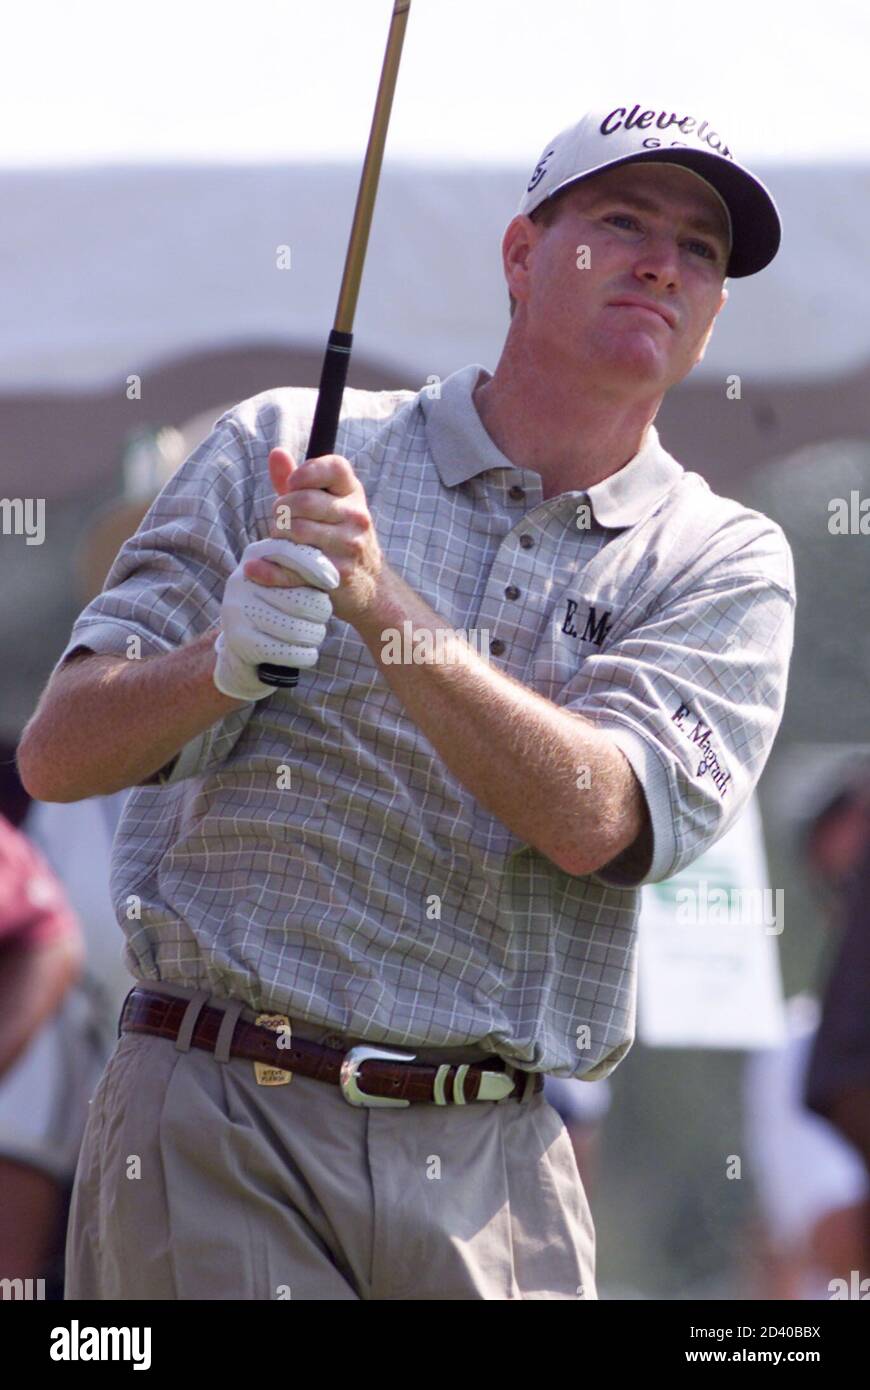 Steve Flesch of Union, KY, watches his tee shot off the first tee during  the final round in the National Car Rental Golf Classic October 29, 2000.  Flesch began the day AT